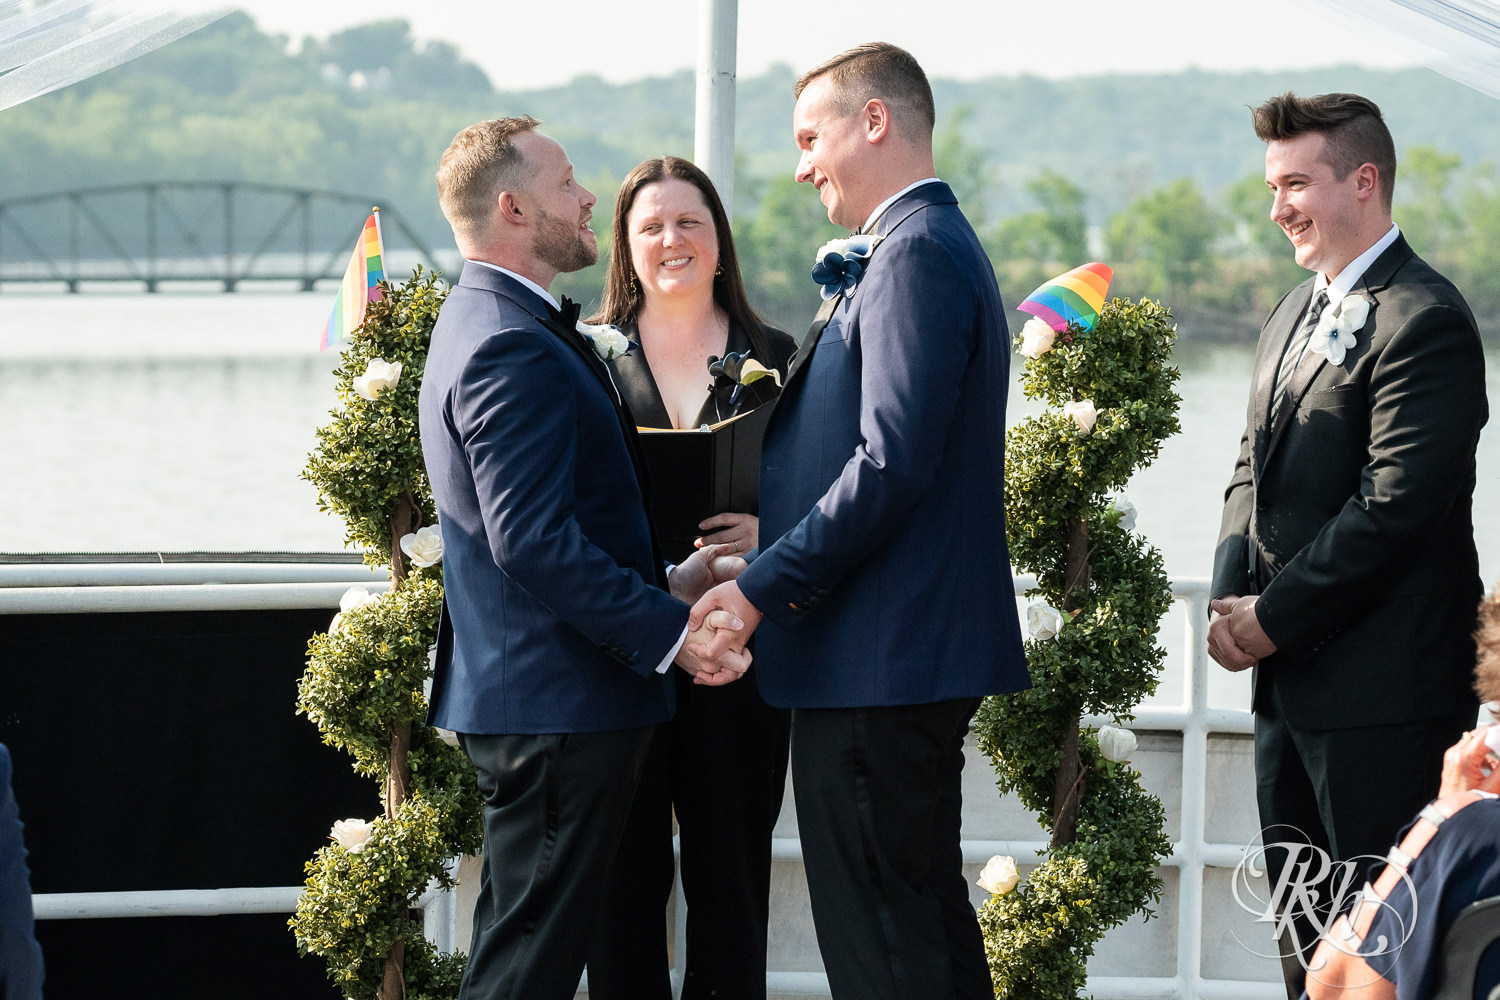 Grooms take part in wedding ceremony on the Majestic Star by Stillwater River Boats in Stillwater, Minnesota.